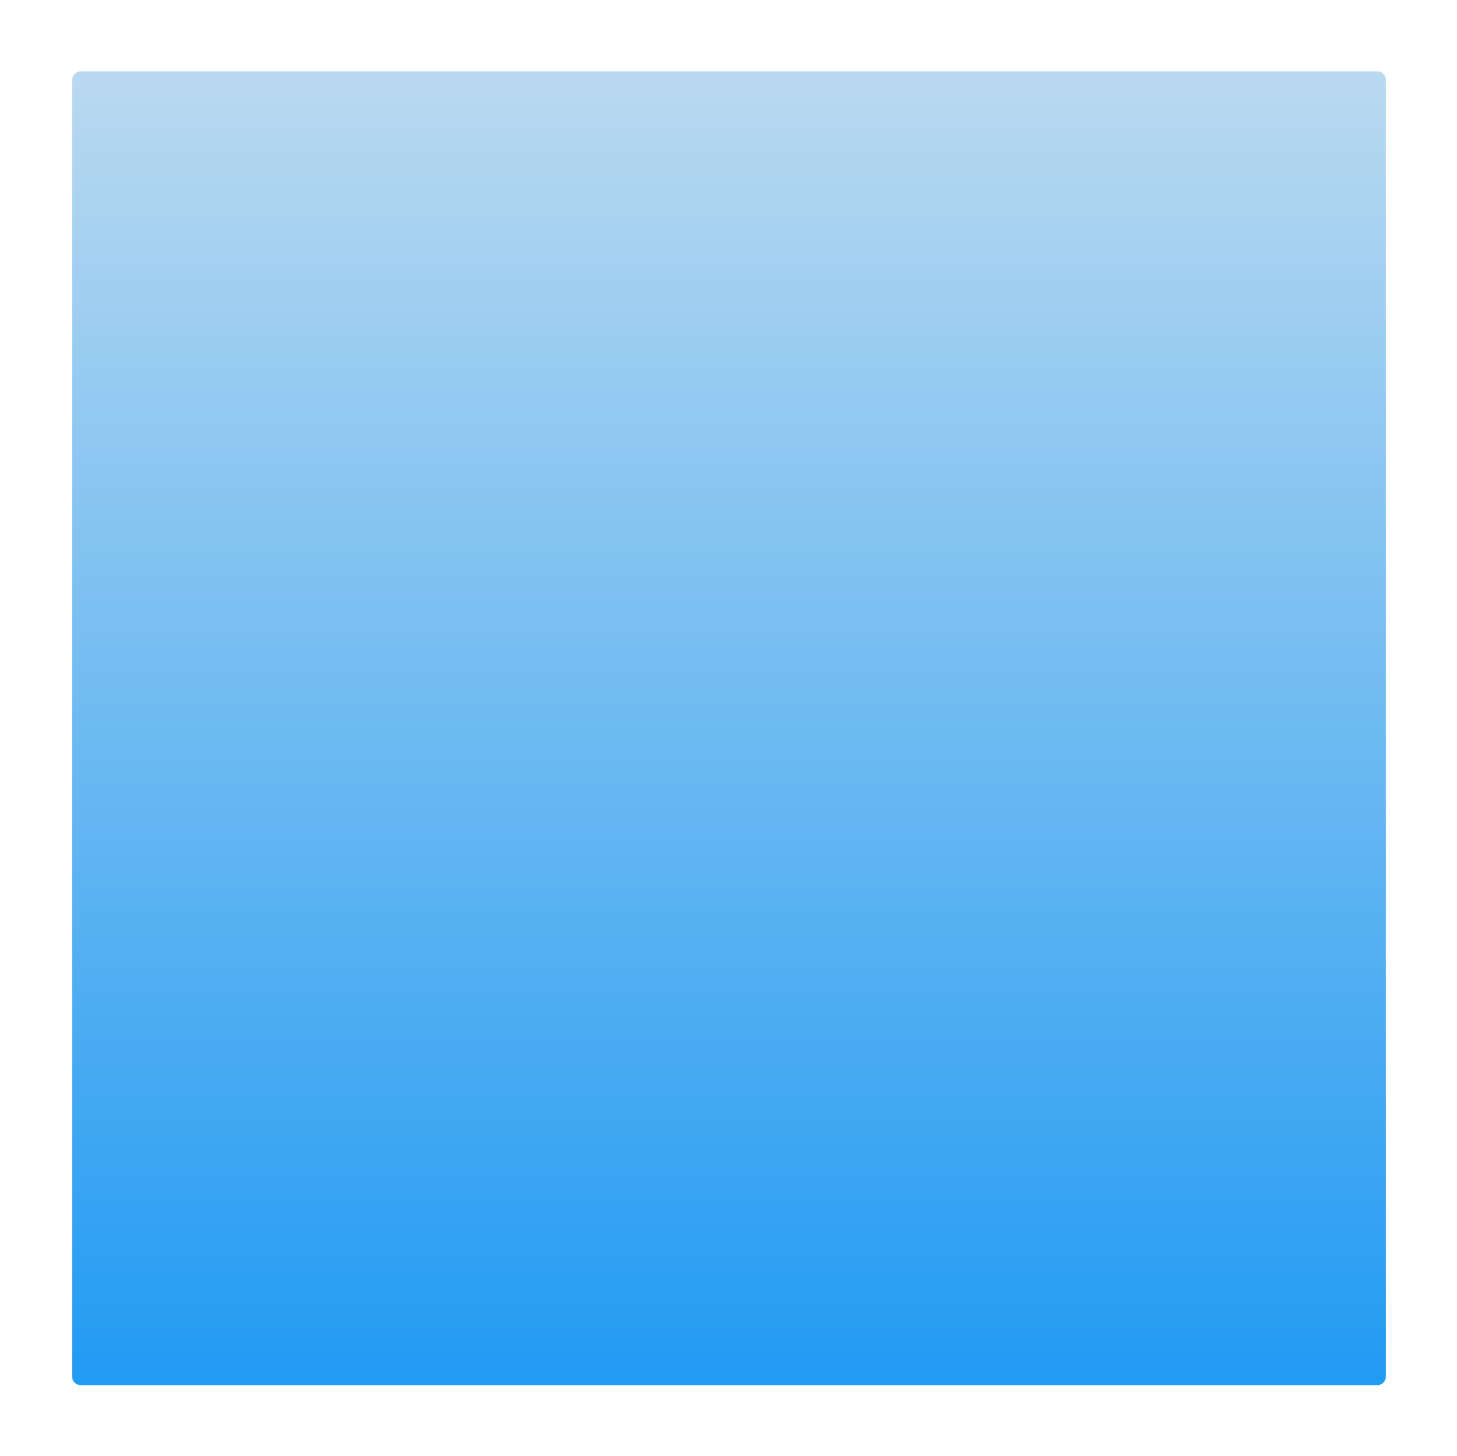 Download Svg Transparency Gradient Graphic Free Download - Light Blue Color Transparent PNG Image with No Background PNGkey.com